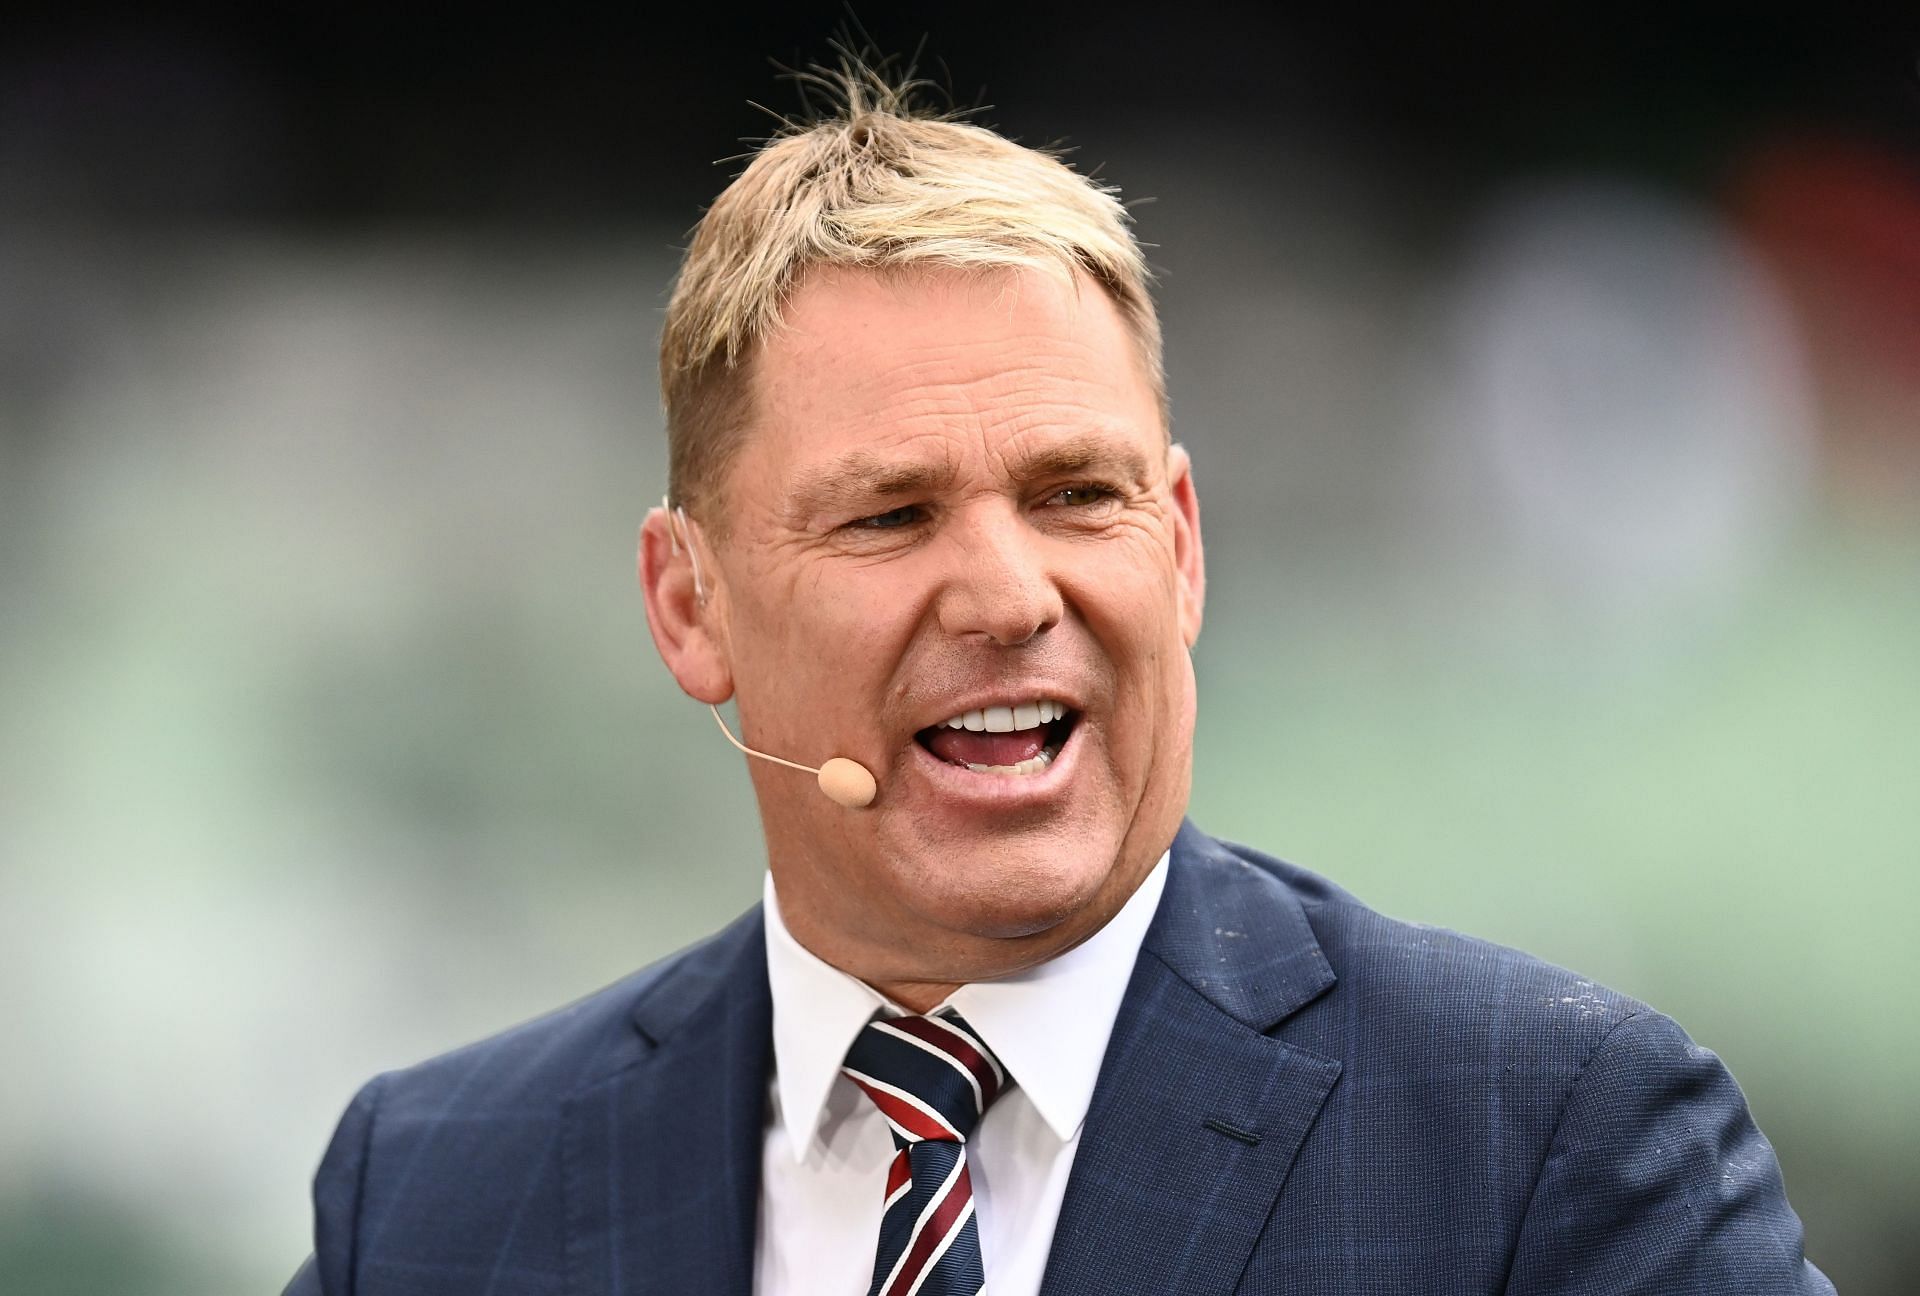 Shane Warne passed away on Friday, March 4, at the age of 52